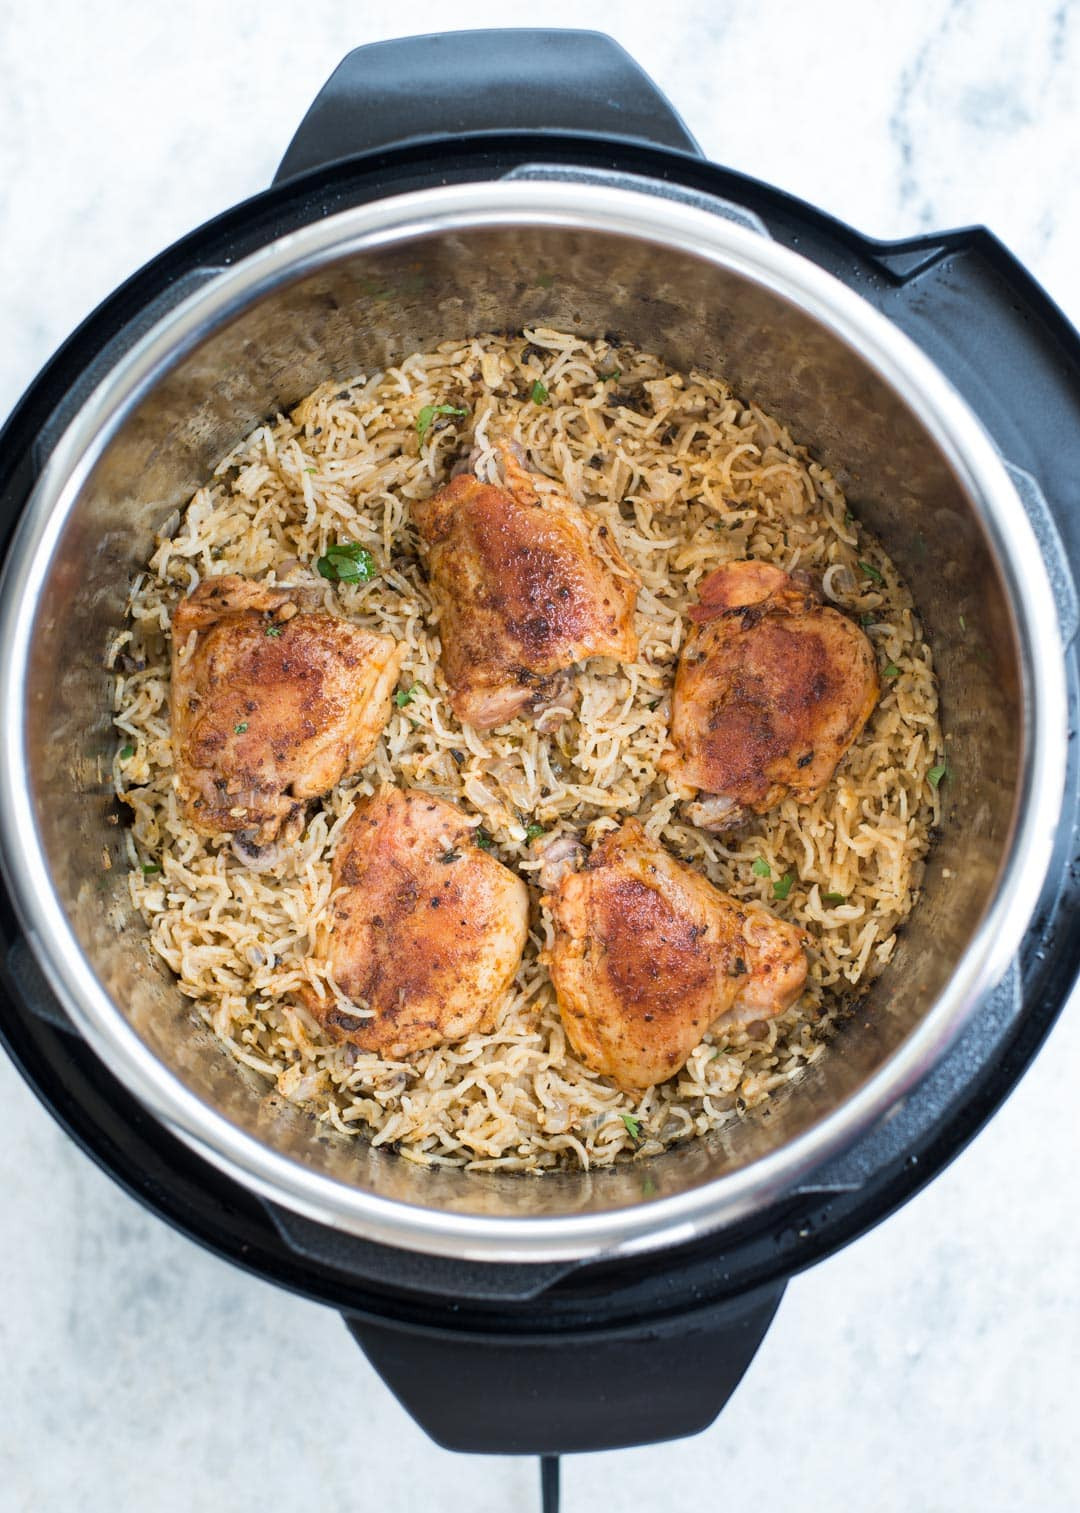 Instant Pot Chicken And Rice Recipes
 INSTANT POT GARLIC HERB CHICKEN AND RICE